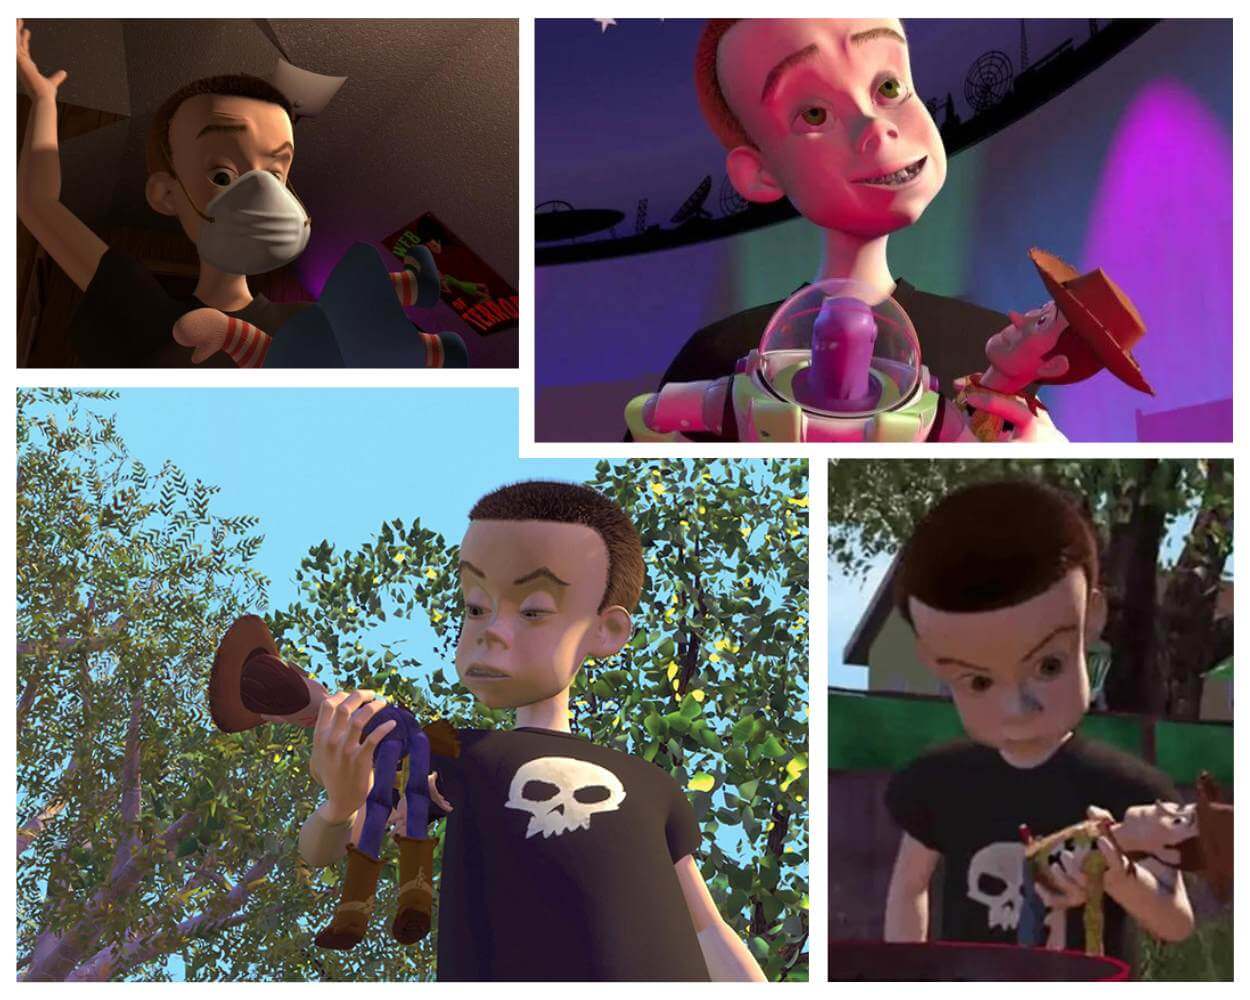 evil sid from toy story